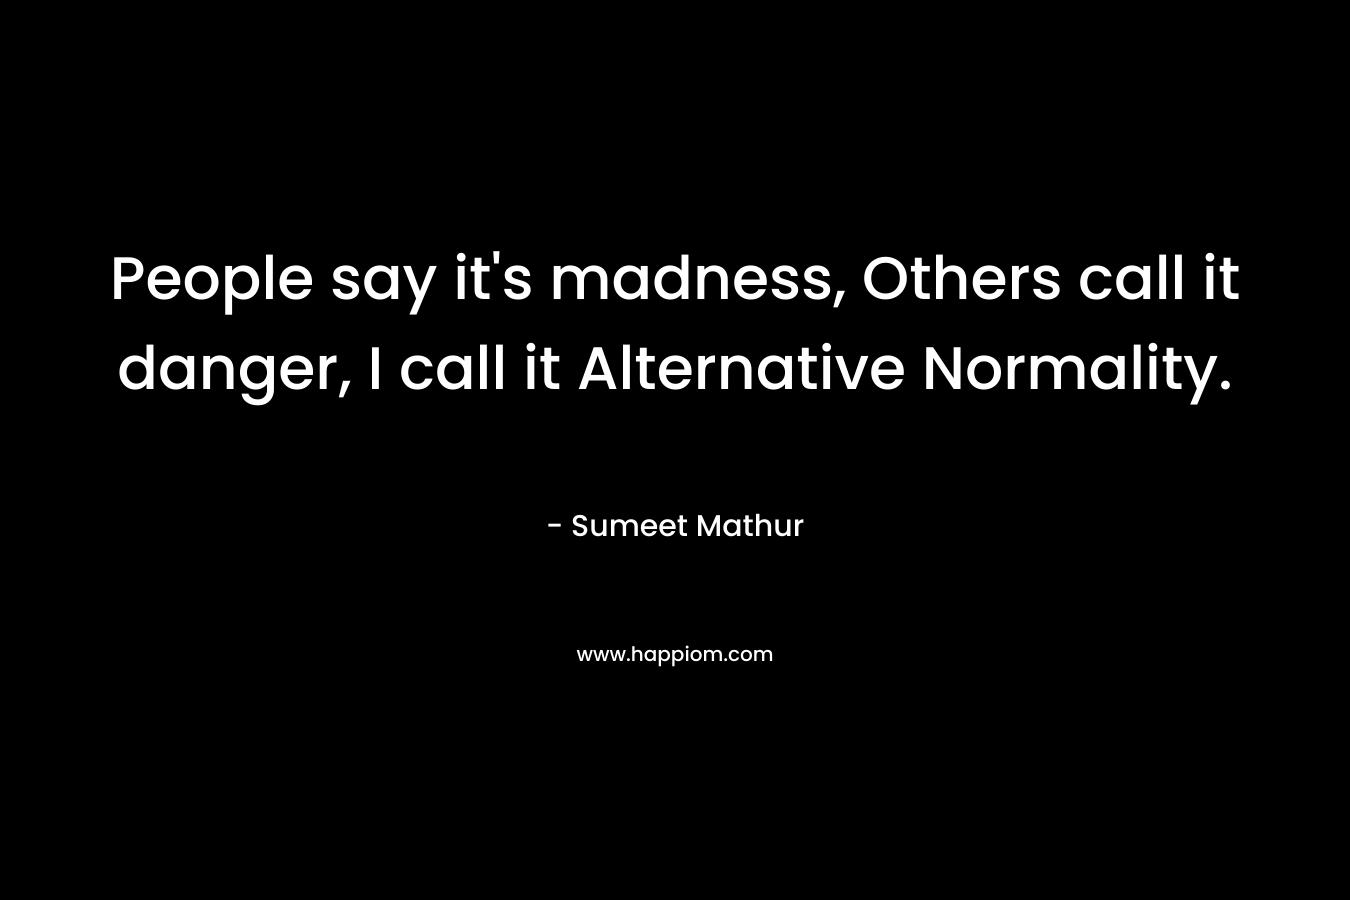 People say it’s madness, Others call it danger, I call it Alternative Normality. – Sumeet Mathur